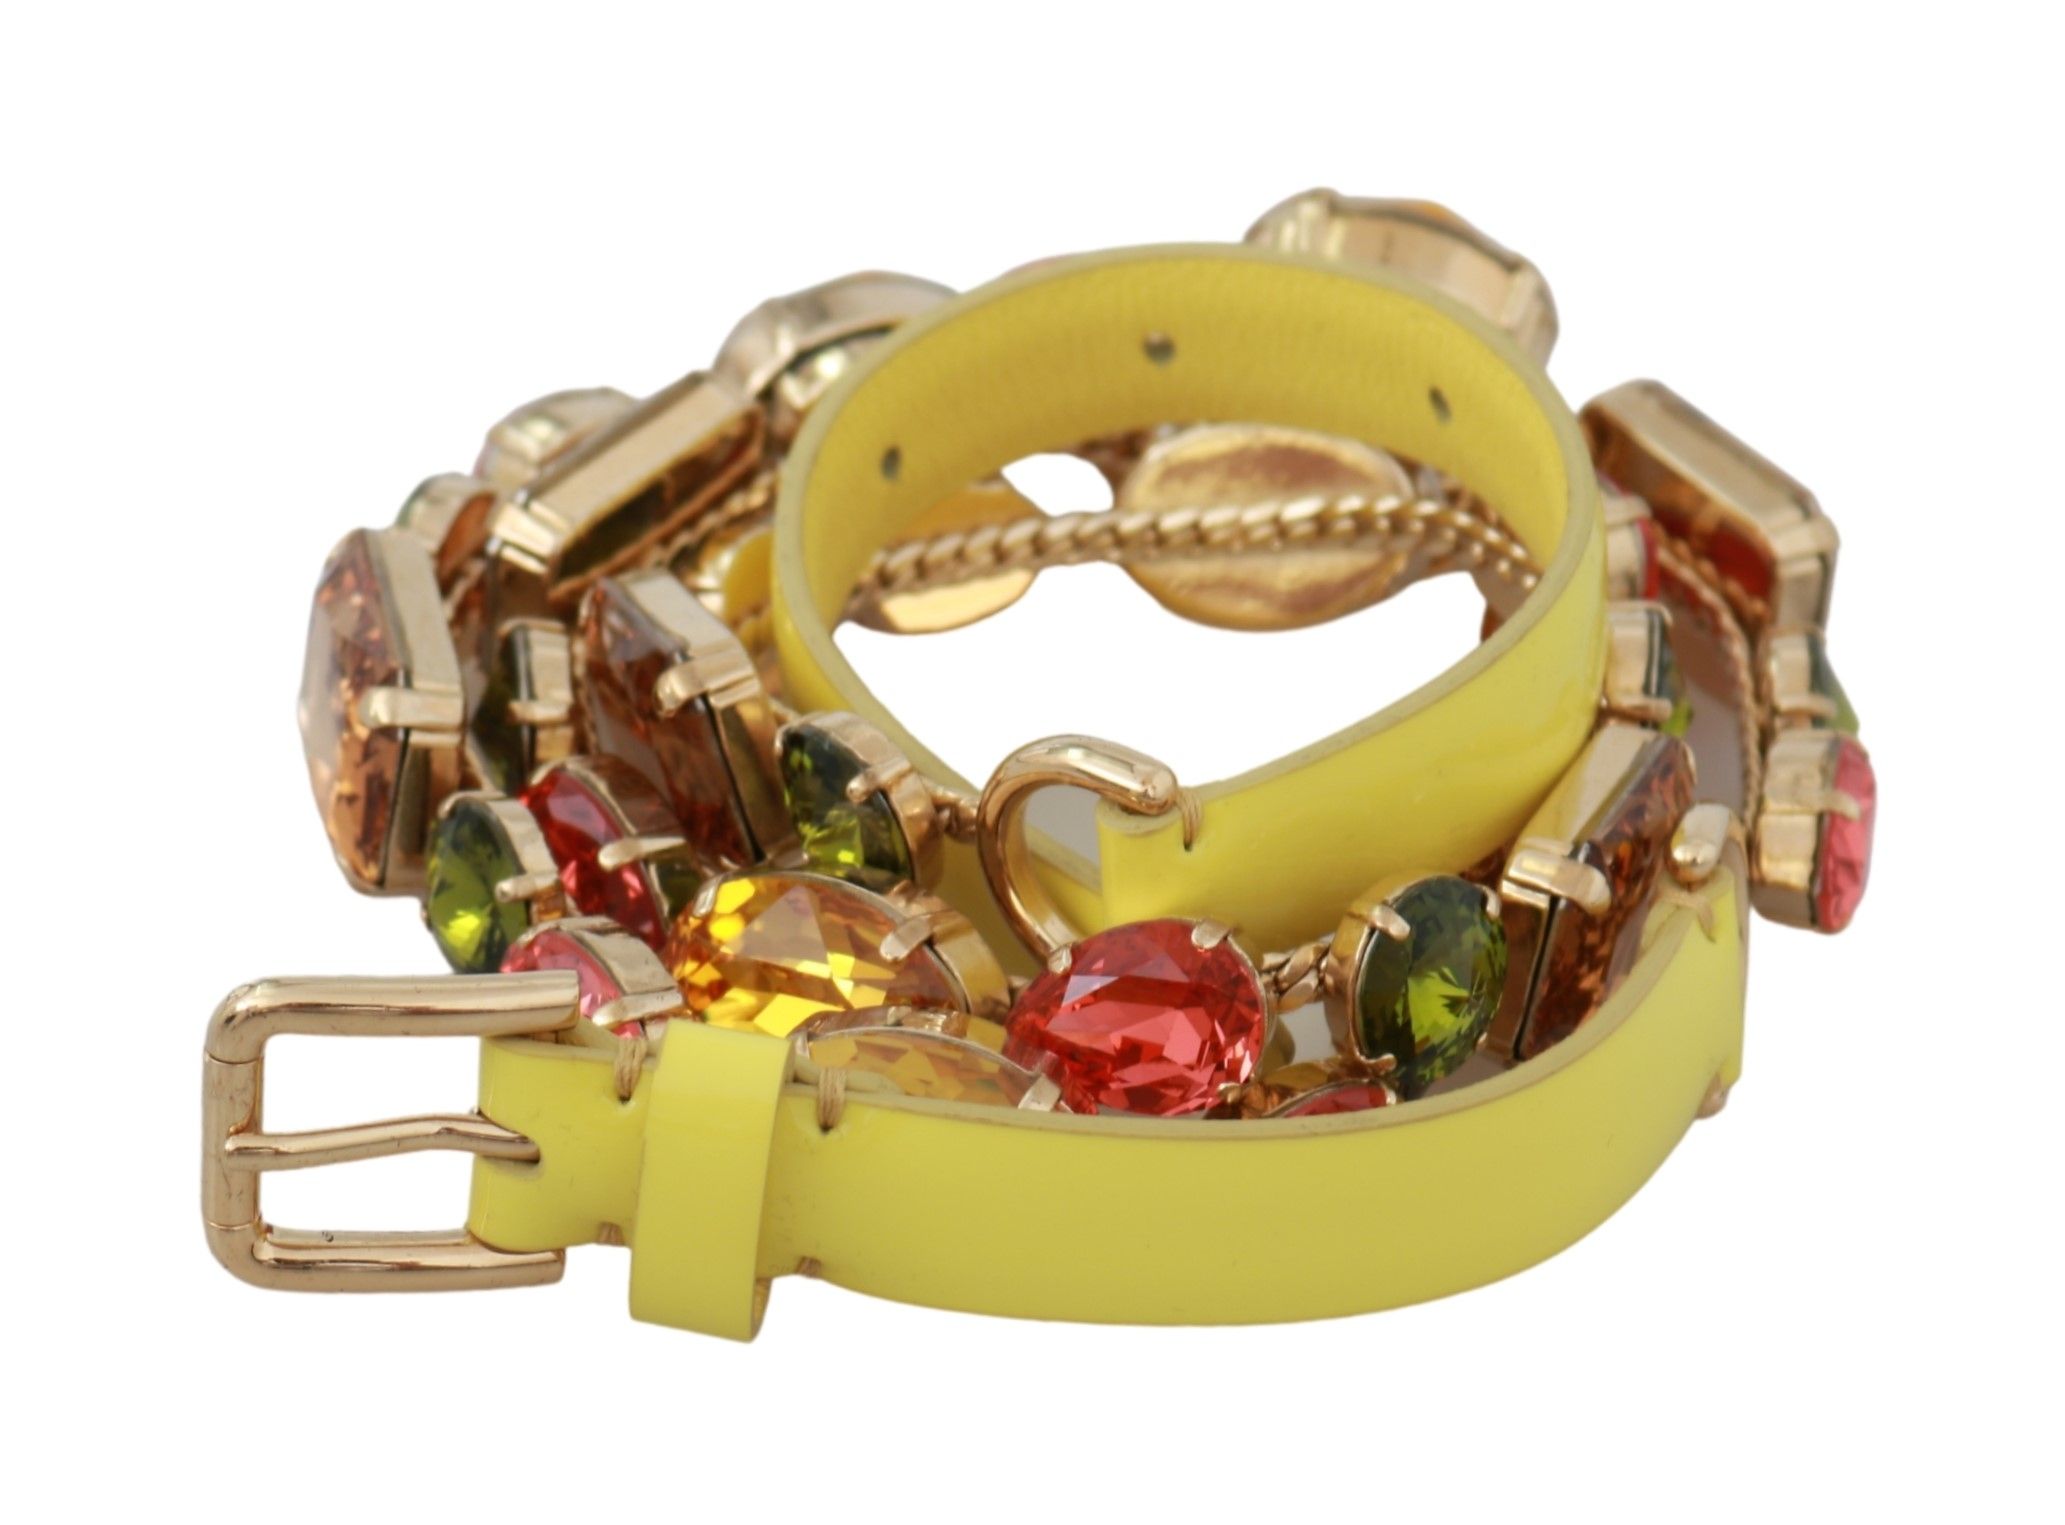 Dolce Gabbana Yellow Gold Multicolor Crystals Waist Belt 70 cm 28 Inches